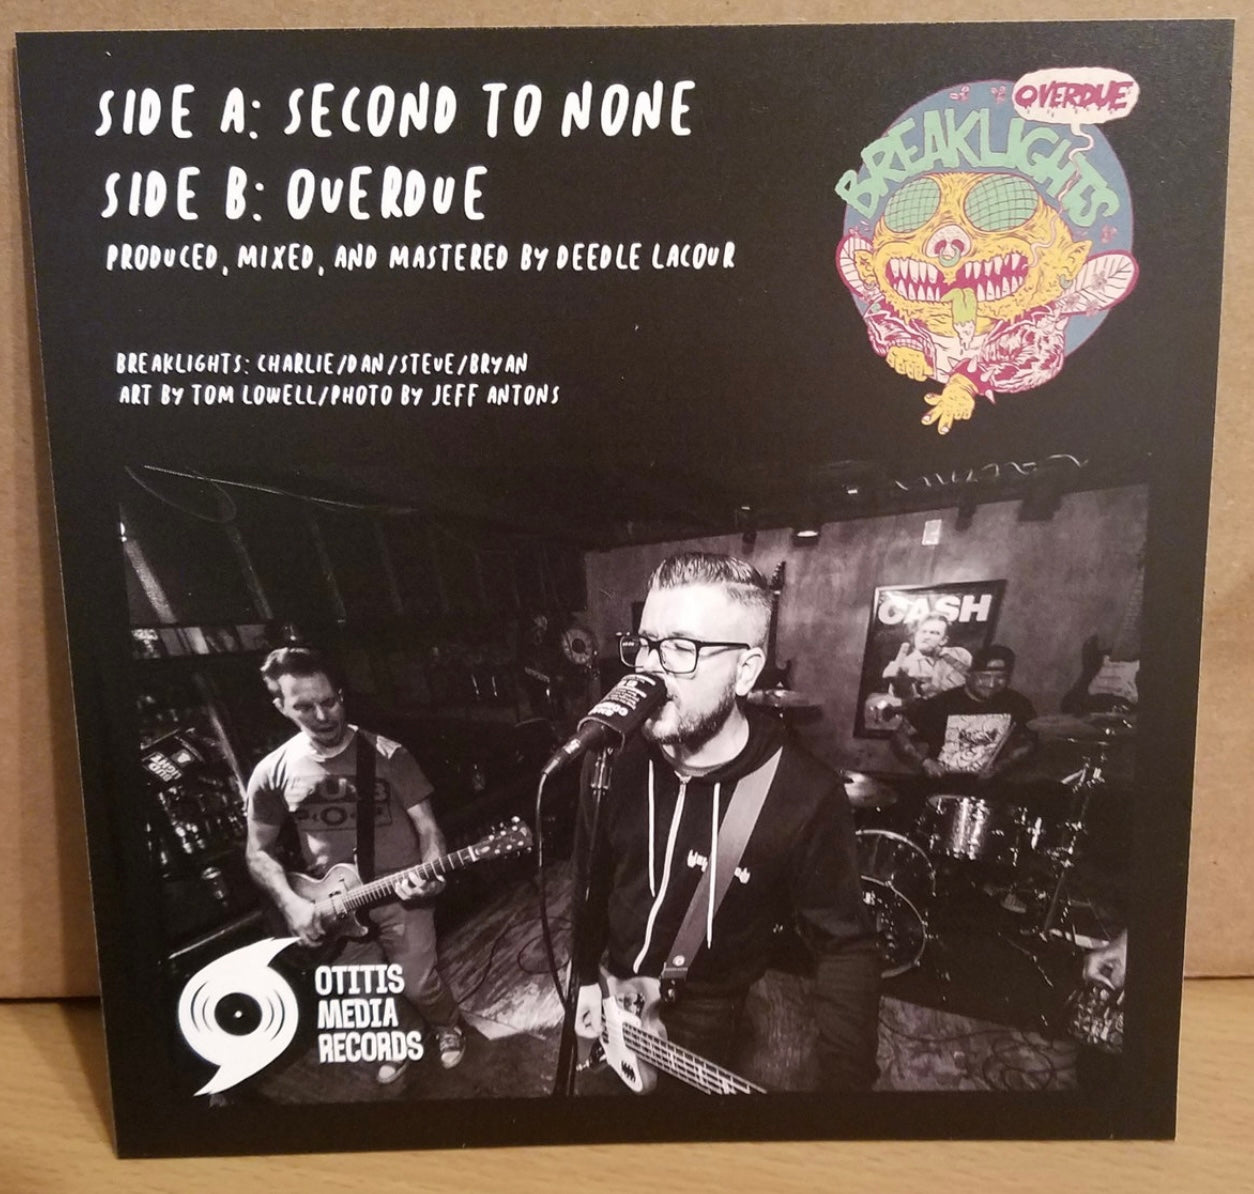 OMR-018 BREAKLIGHTS “Second To None” 7 inch (Colored Vinyl Single)